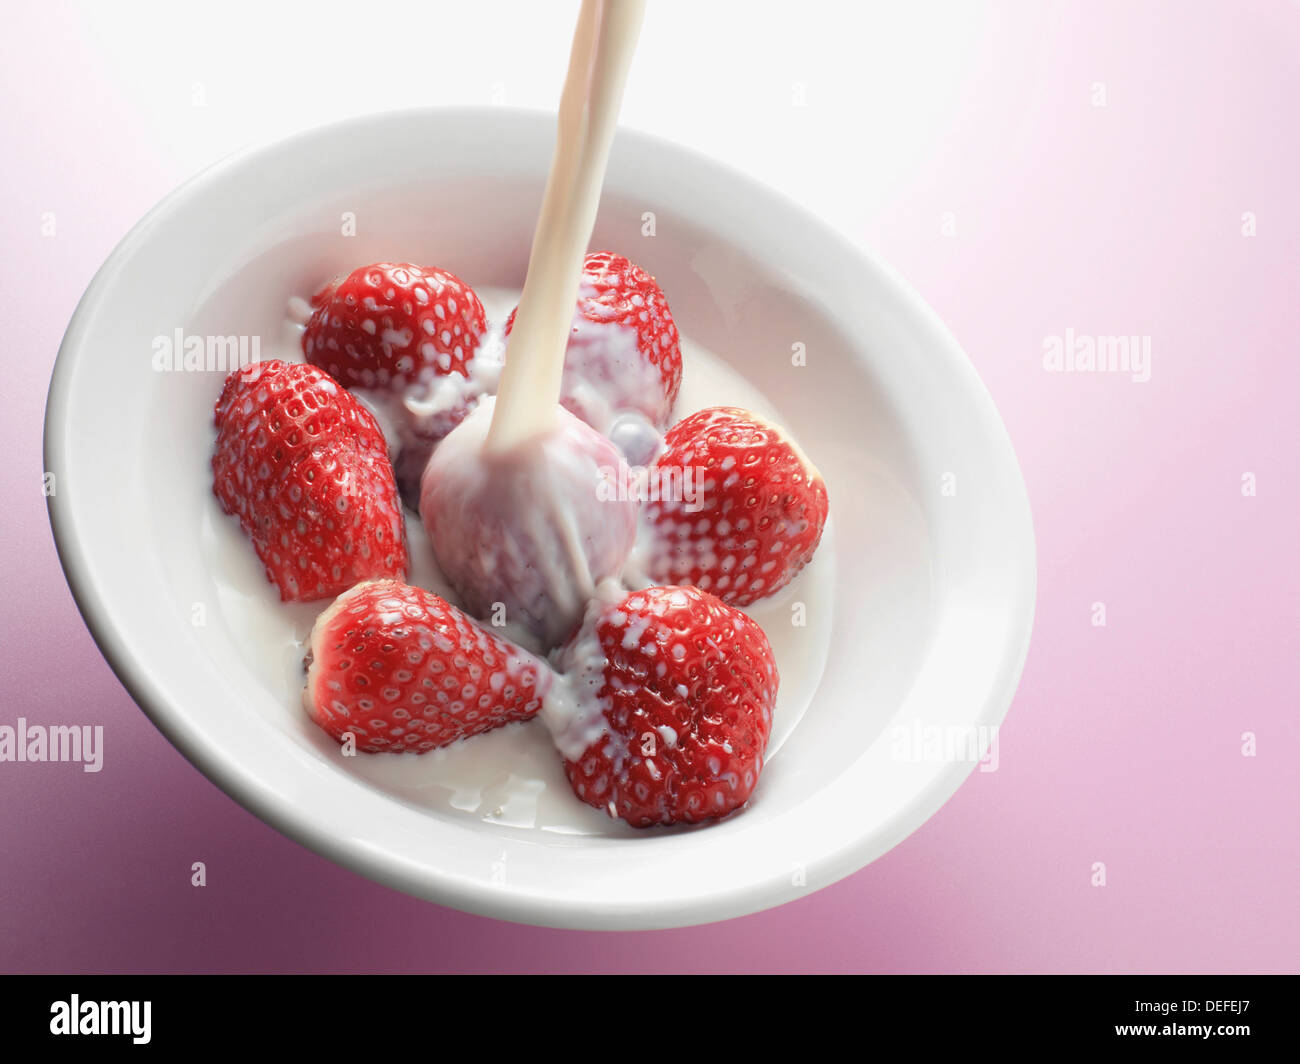 Fresh milk being poured onto a bowl of strawberries Stock Photo